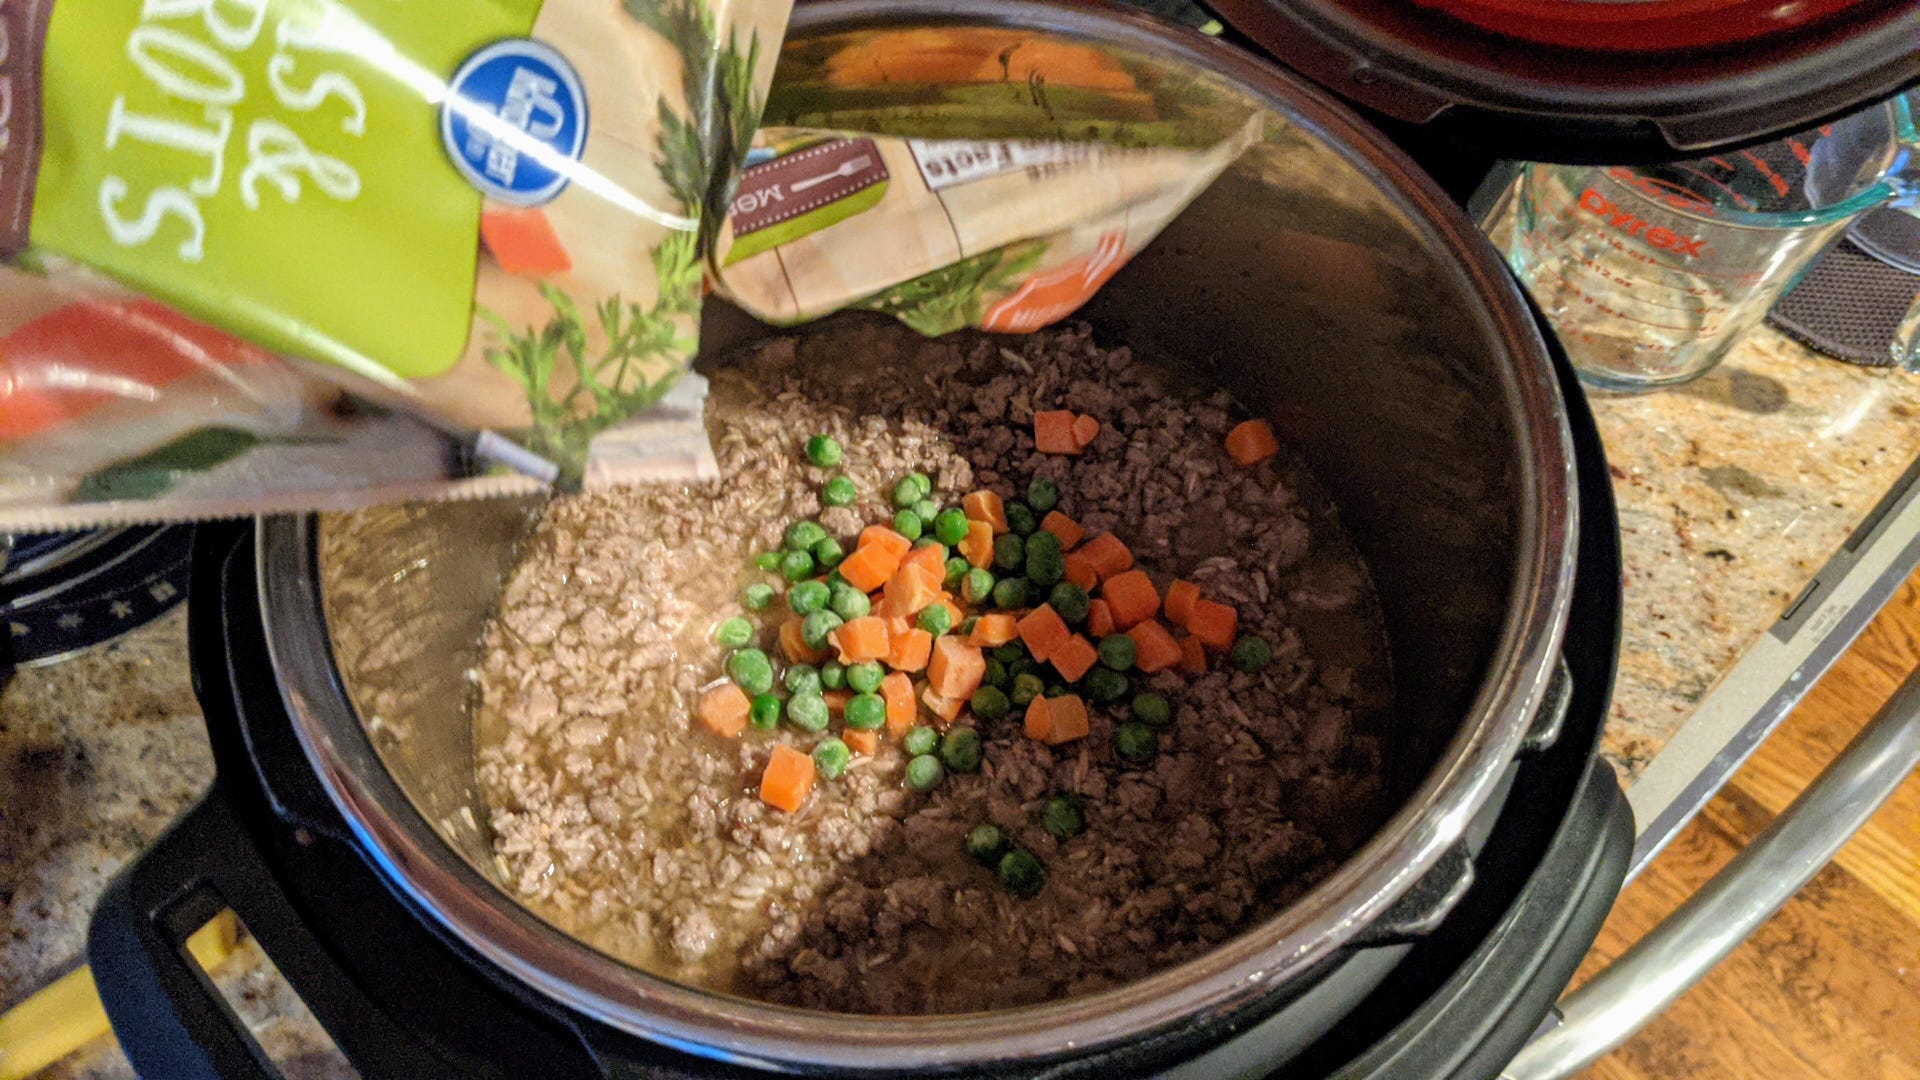 How to make dog food in your Instant Pot - CNET